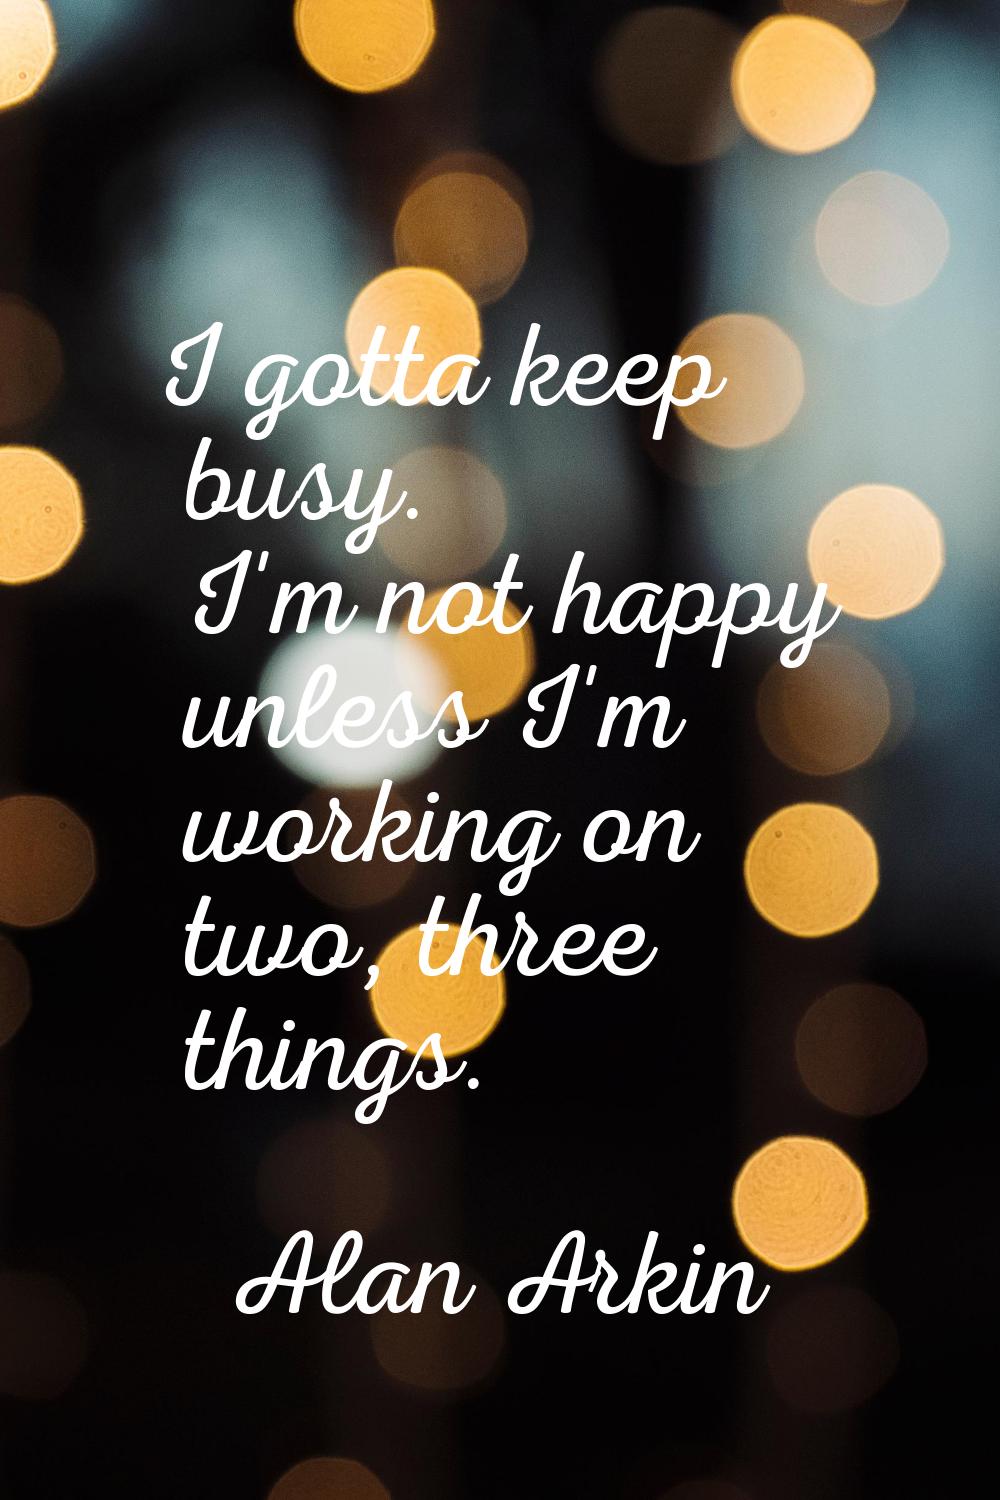 I gotta keep busy. I'm not happy unless I'm working on two, three things.